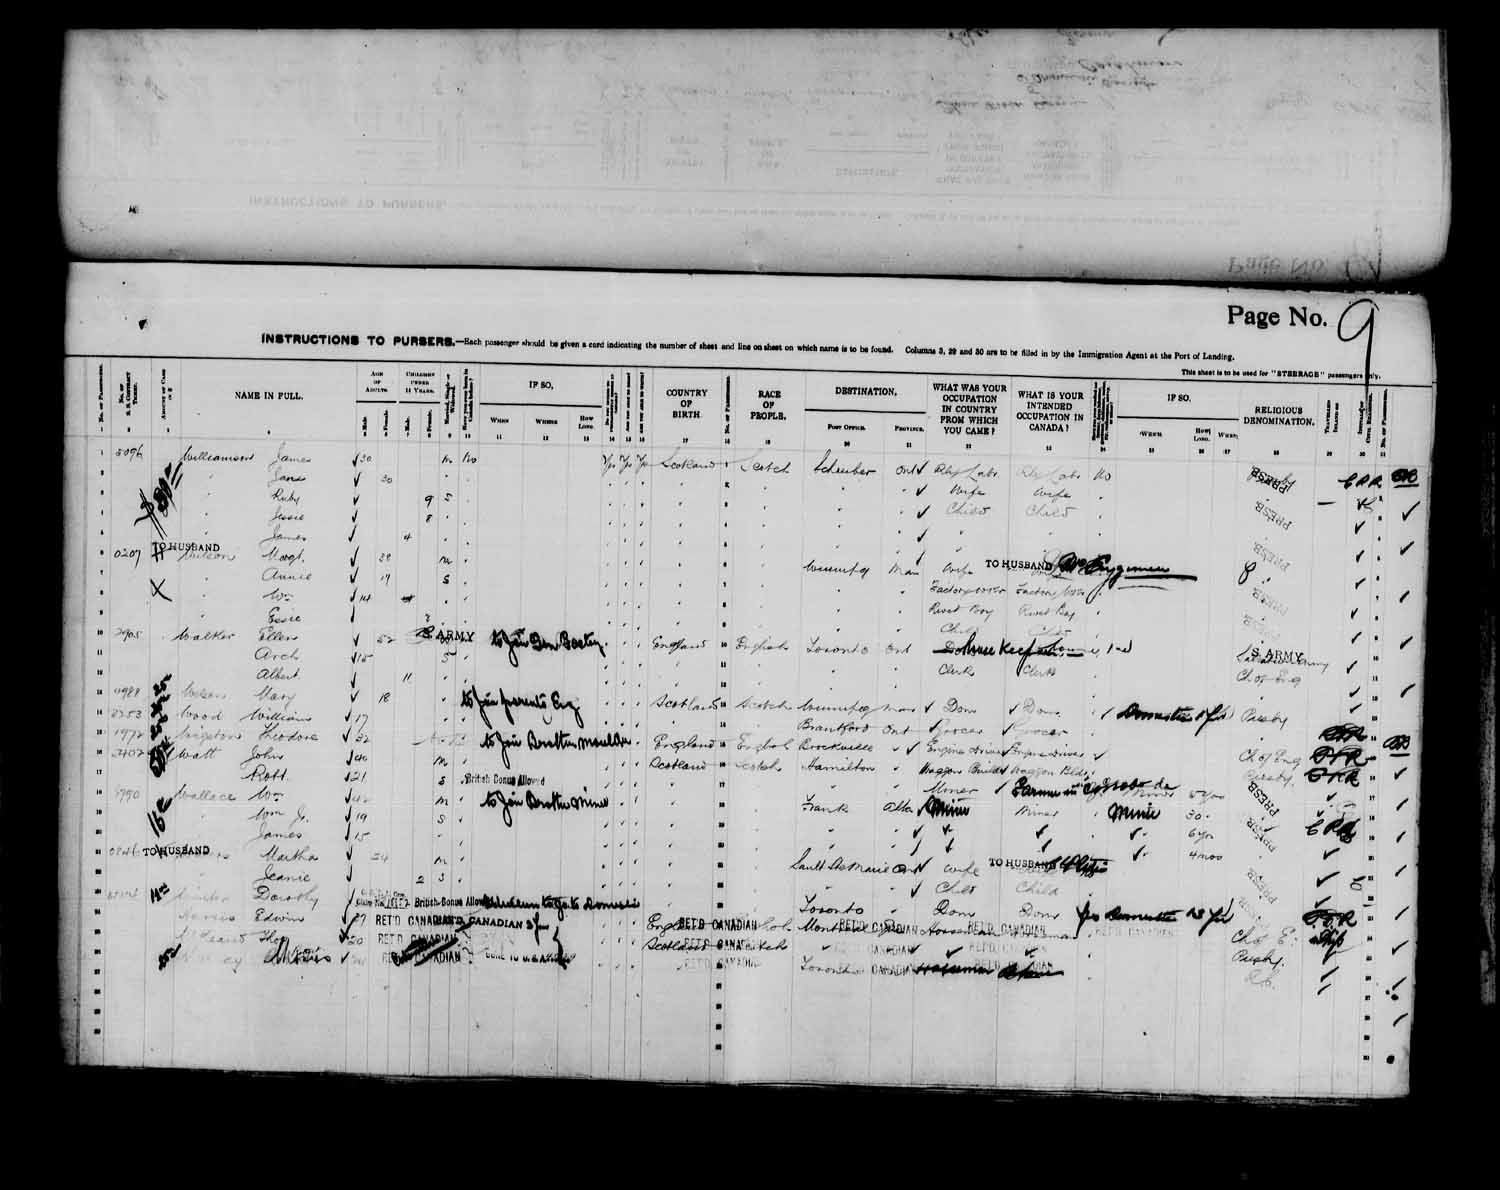 Digitized page of Passenger Lists for Image No.: e003566528